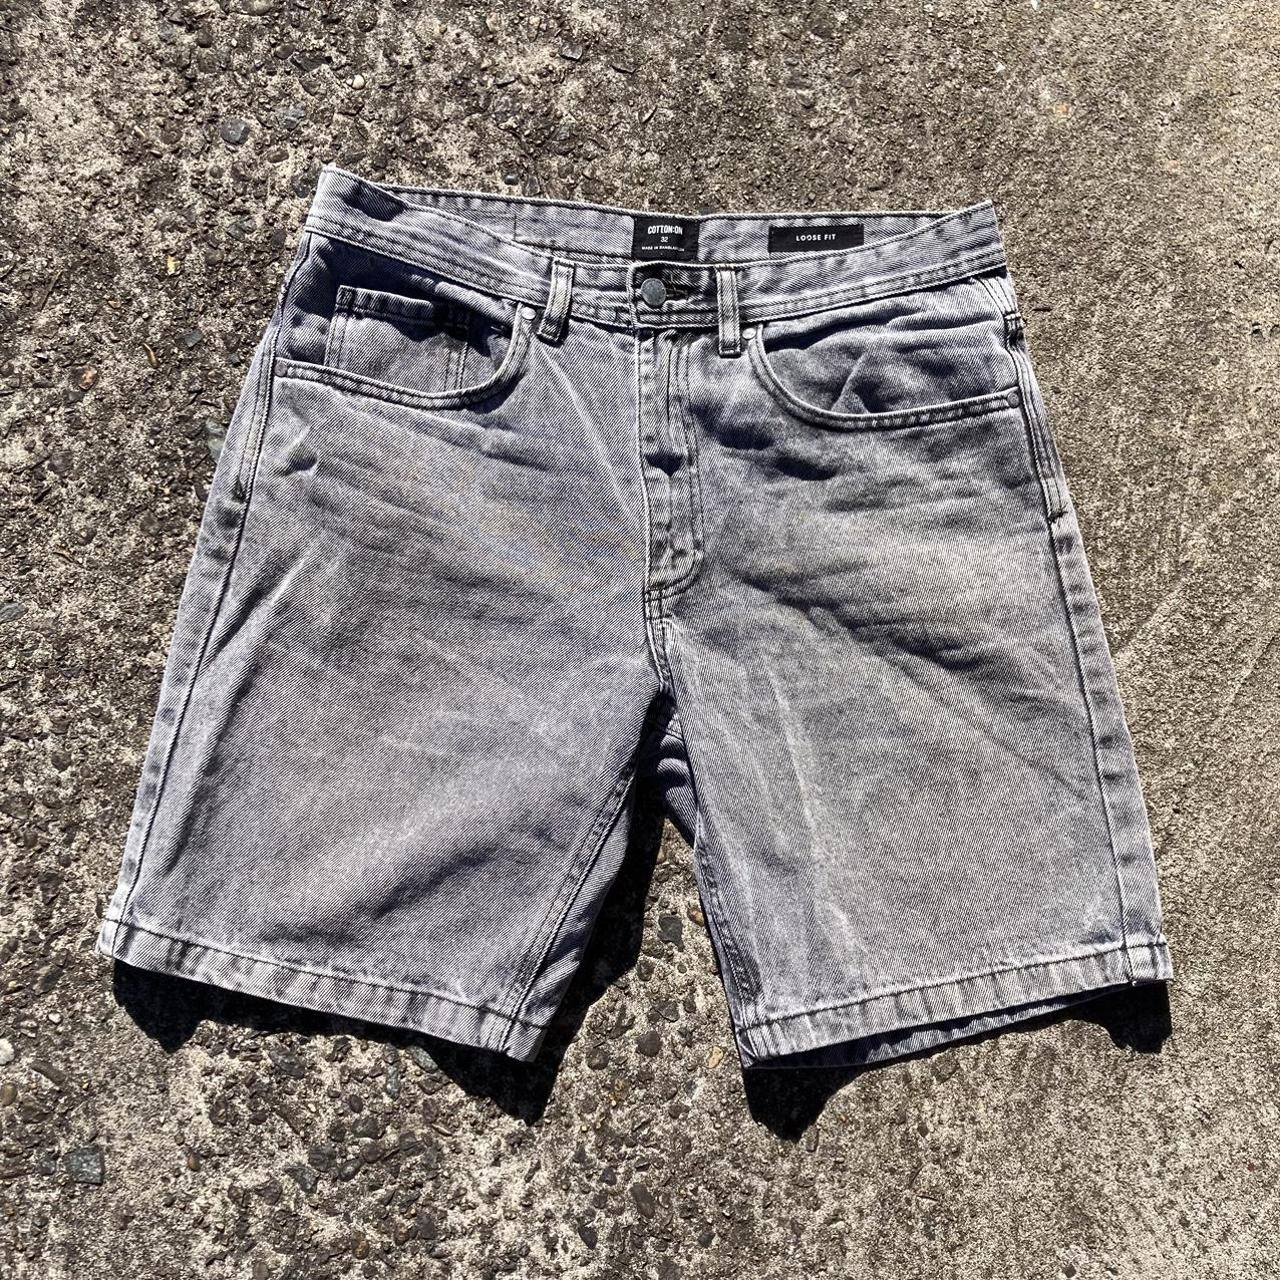 Grey washed loose fit jorts 90s and 00s vibes,... - Depop